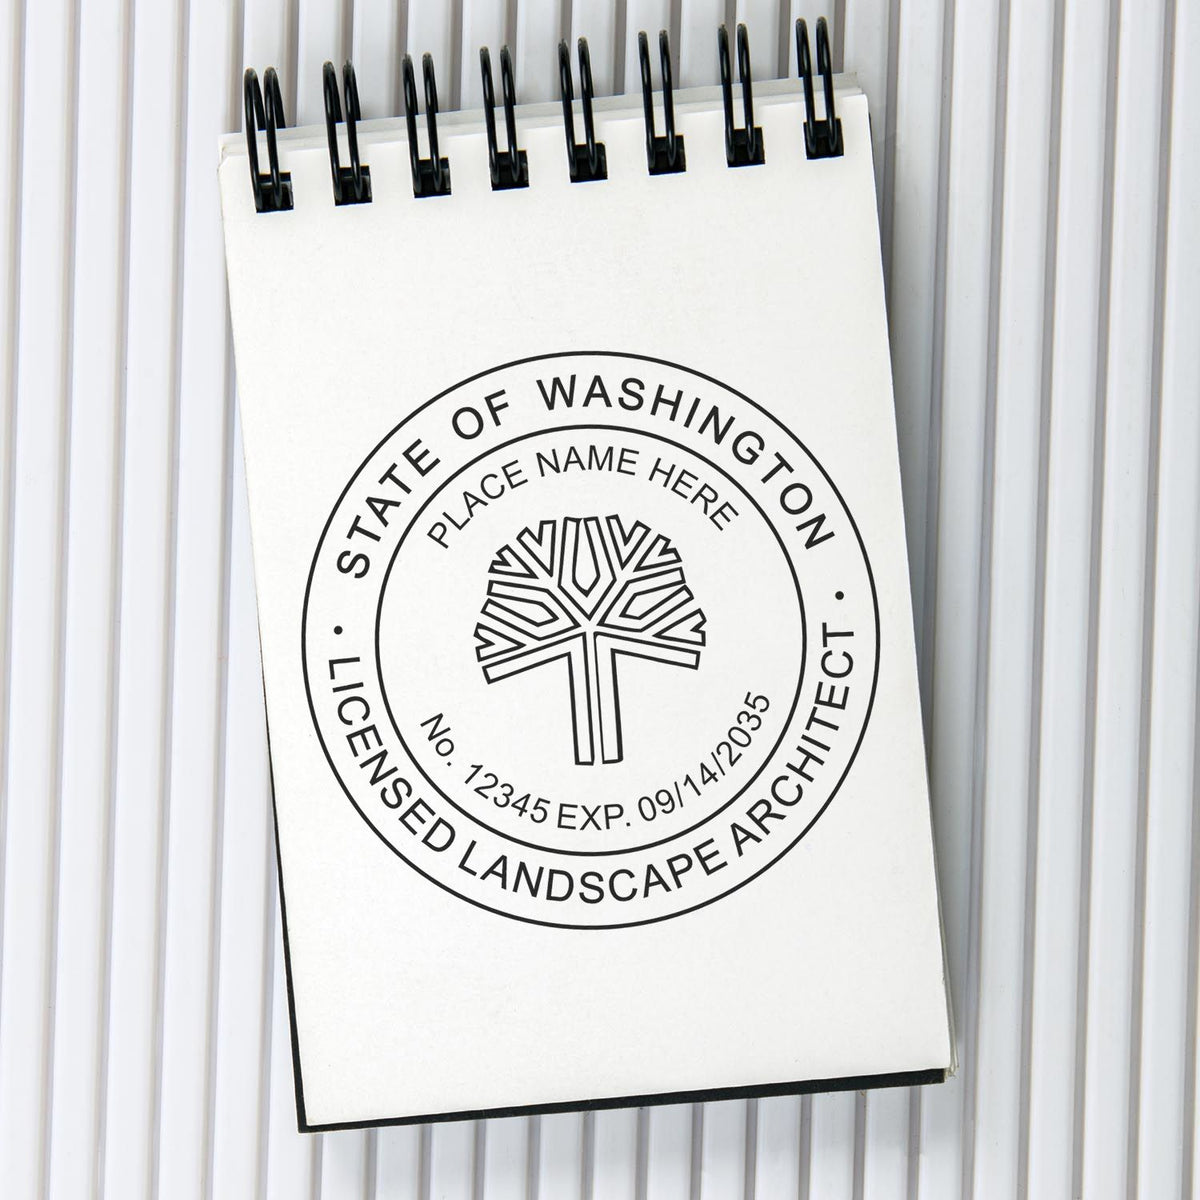 This paper is stamped with a sample imprint of the Premium MaxLight Pre-Inked Washington Landscape Architectural Stamp, signifying its quality and reliability.